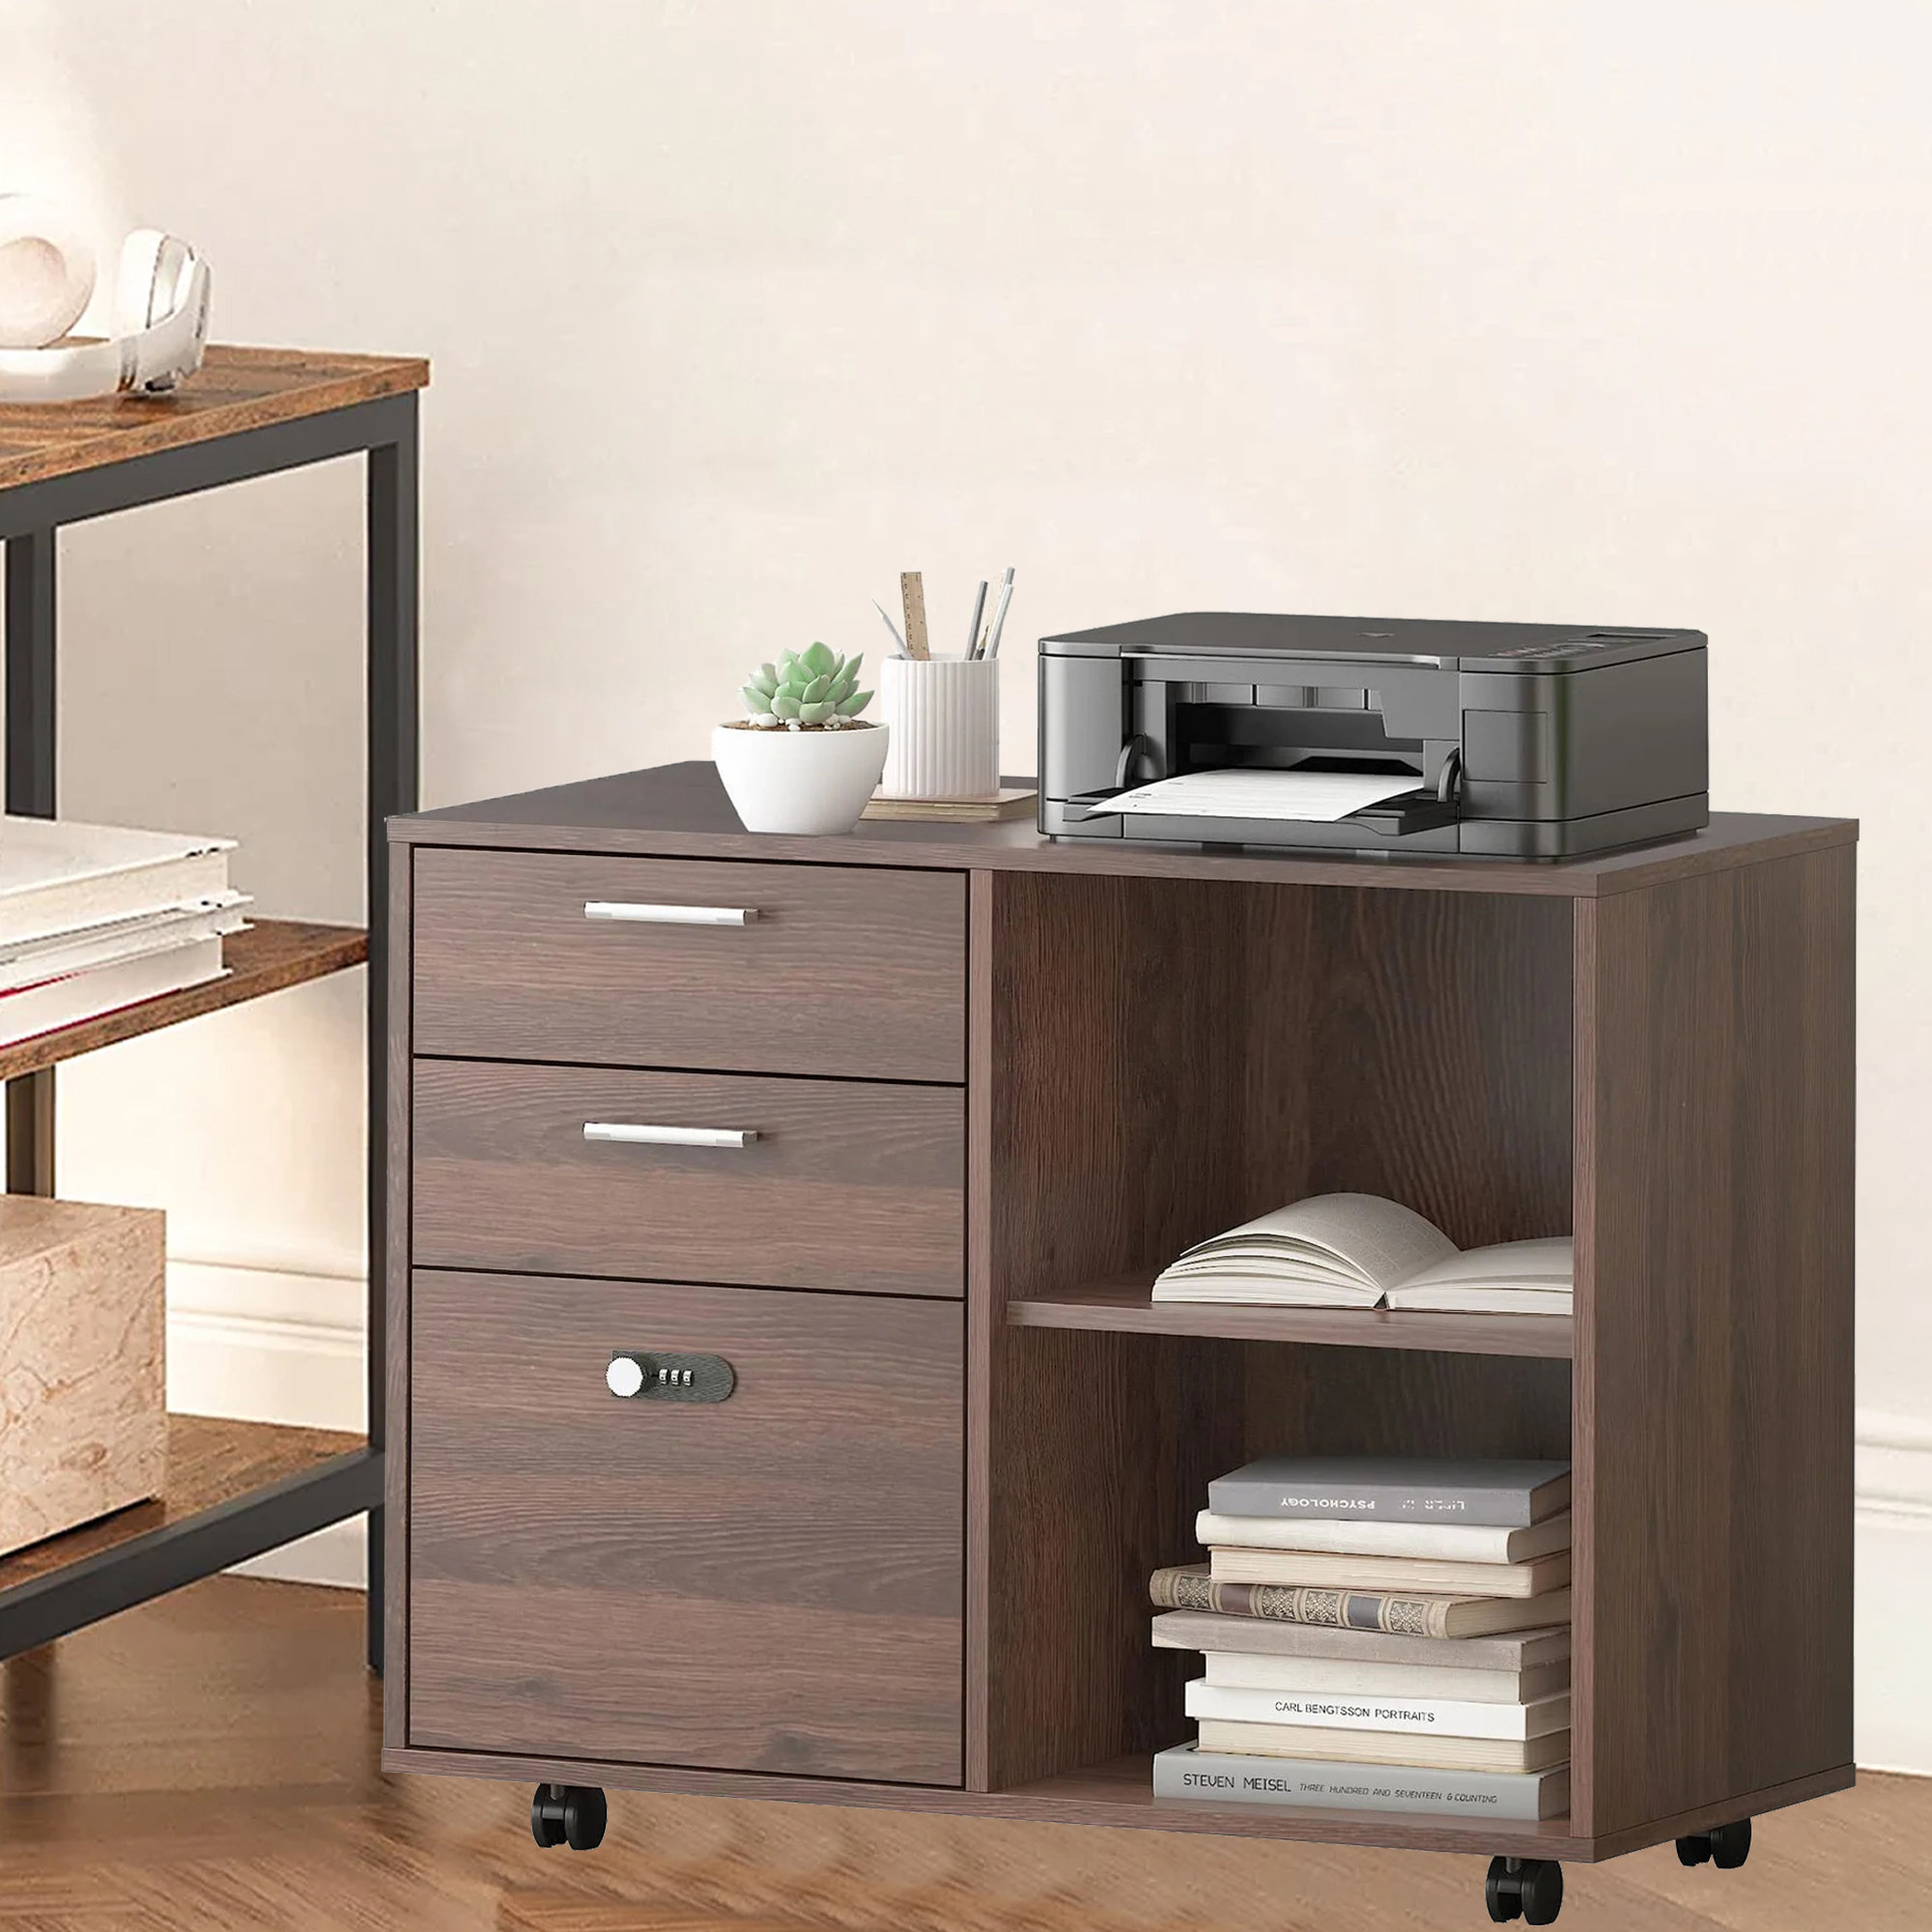  DEVAISE 3-Drawer Wood File Cabinet, Mobile Lateral